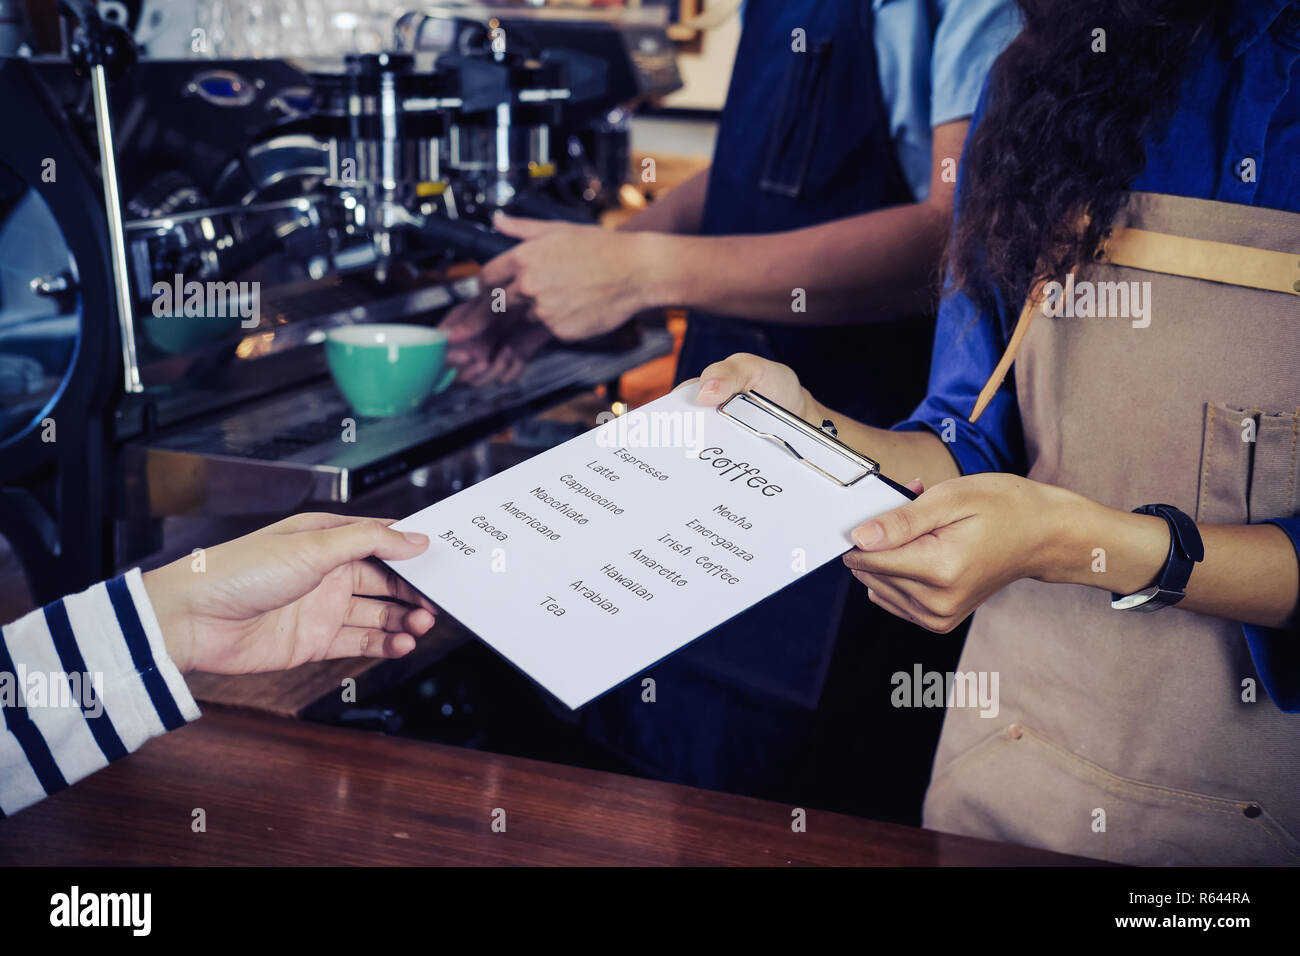 Baristas are recommending coffee menu to customer. Cafe restaurant service, food and drink industry concept. Stock Photo